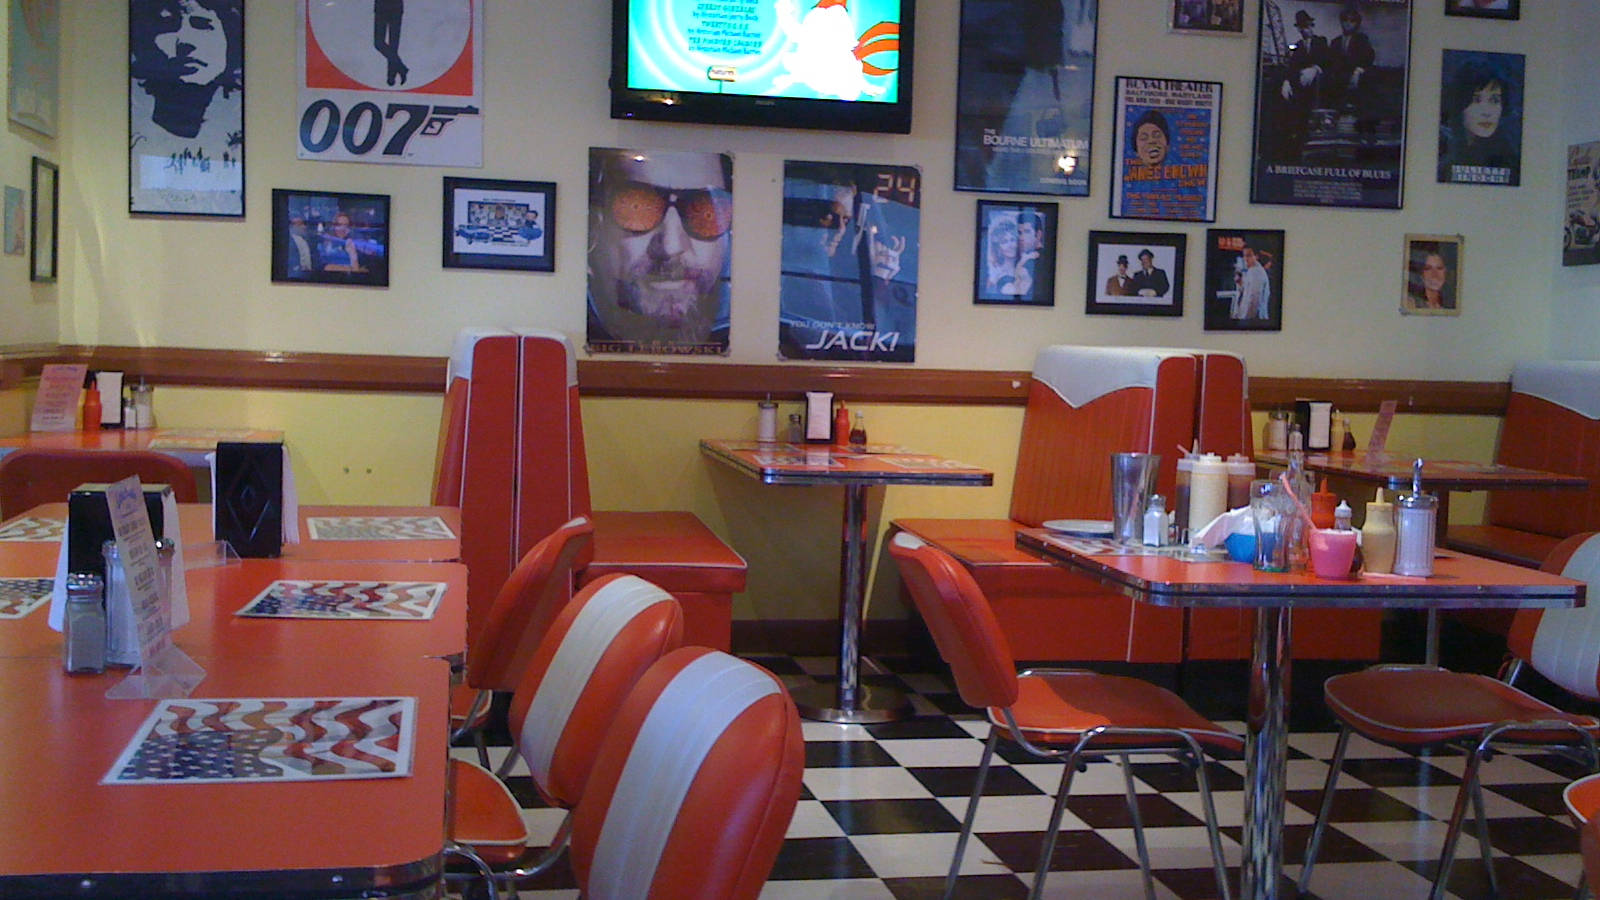 The American 50s Diner Wallpaper